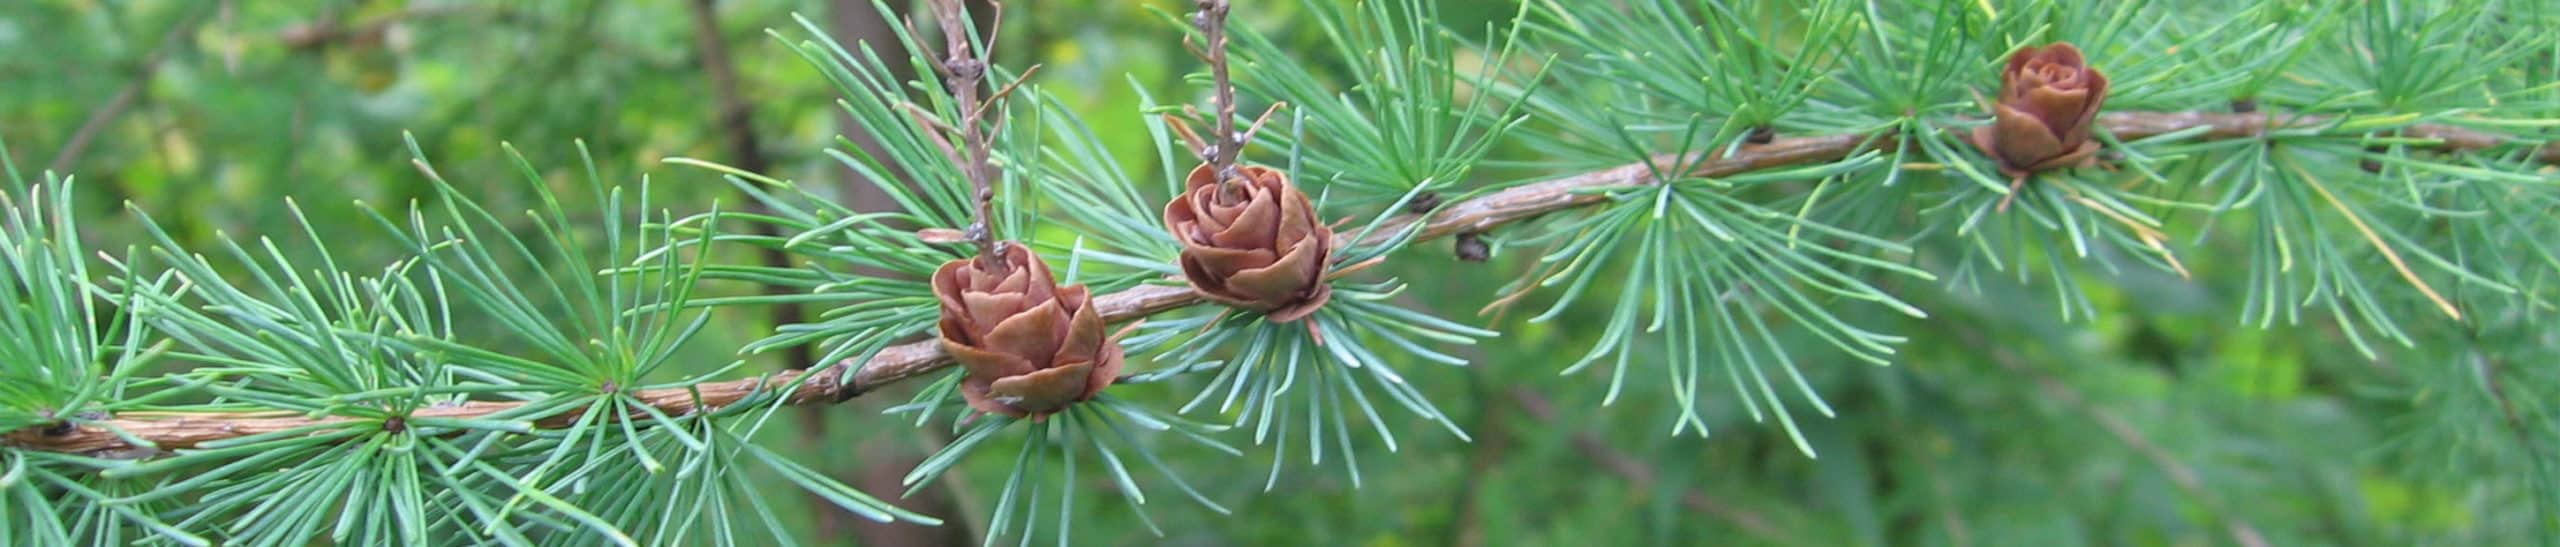 Close-up of Tamarack Branch with green needles and brown acorns